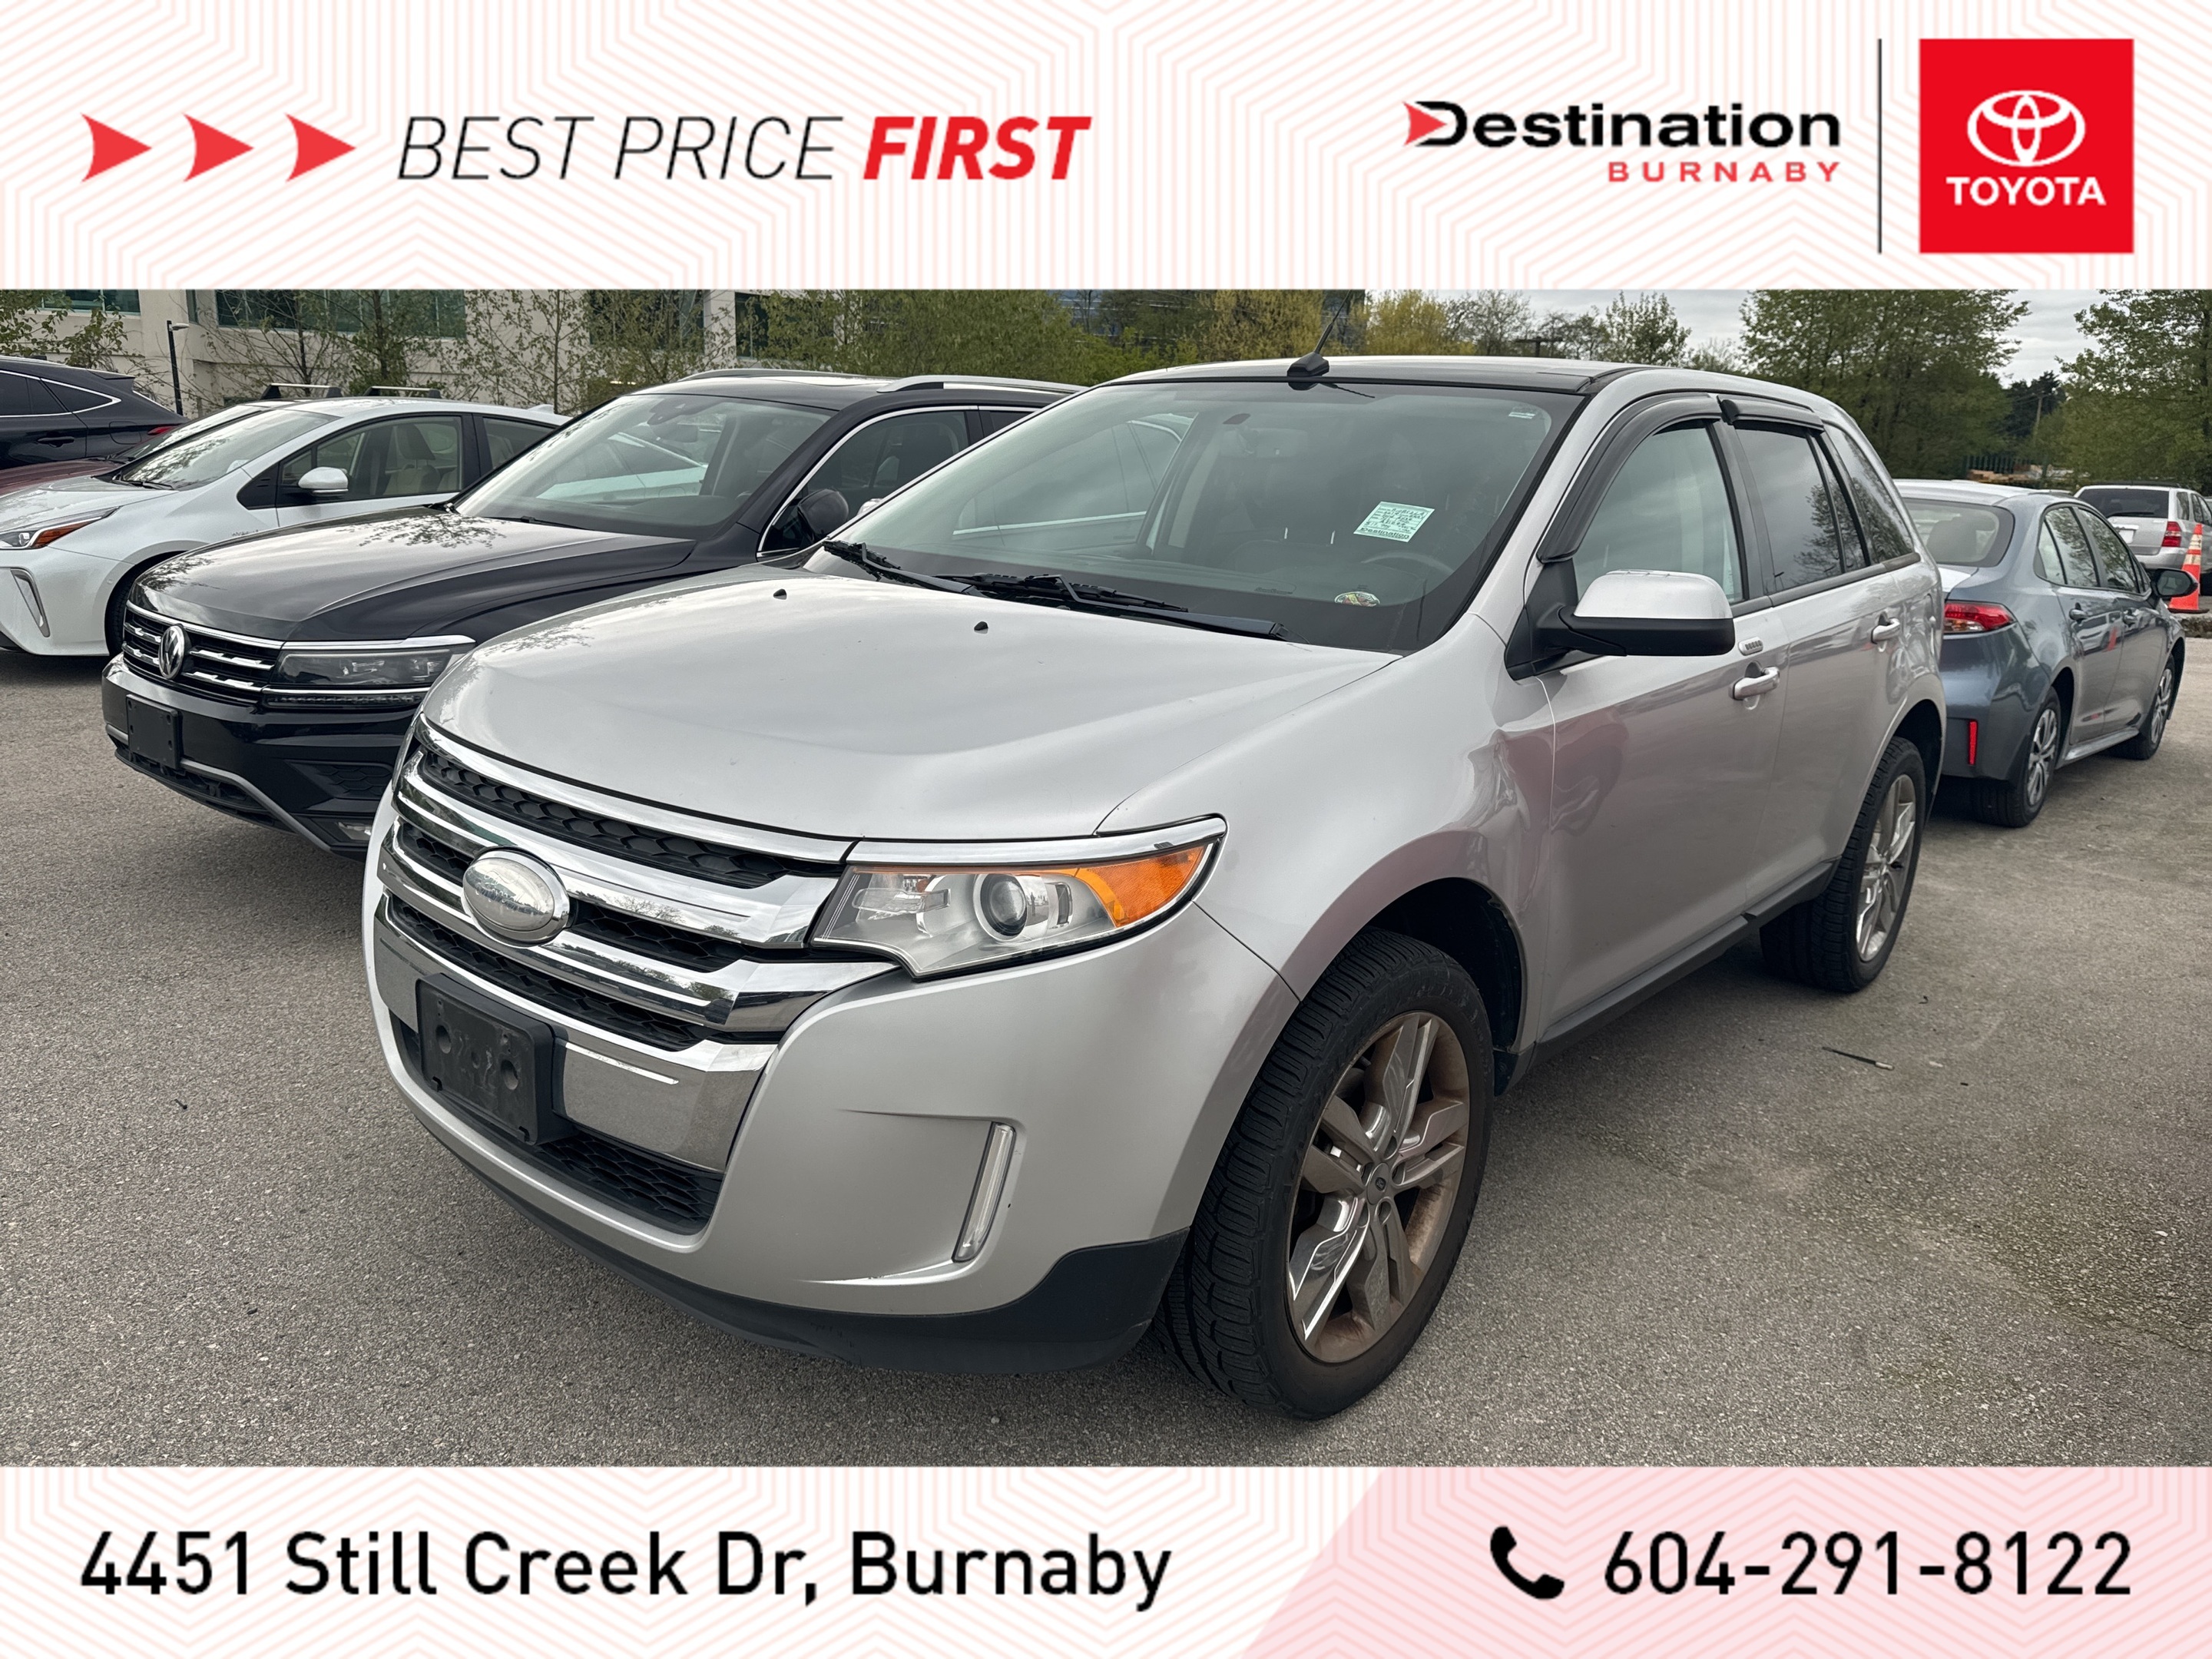 2014 Ford Edge SEL - No Accidents! Low KM!